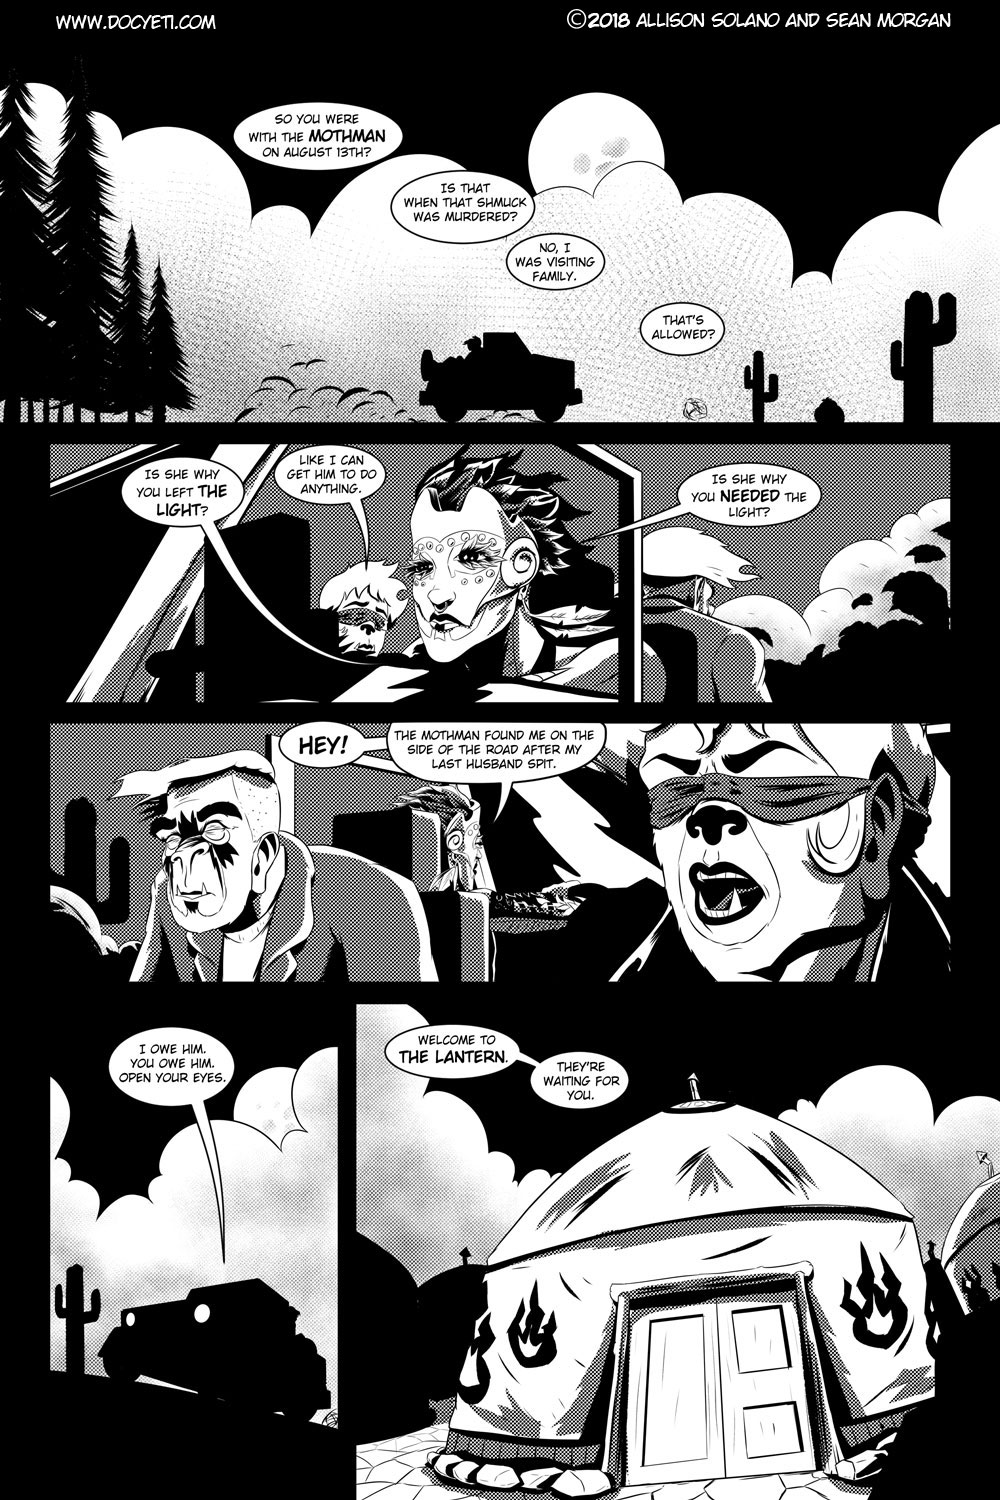 Flight of the Mothman! Issue 2 page 9